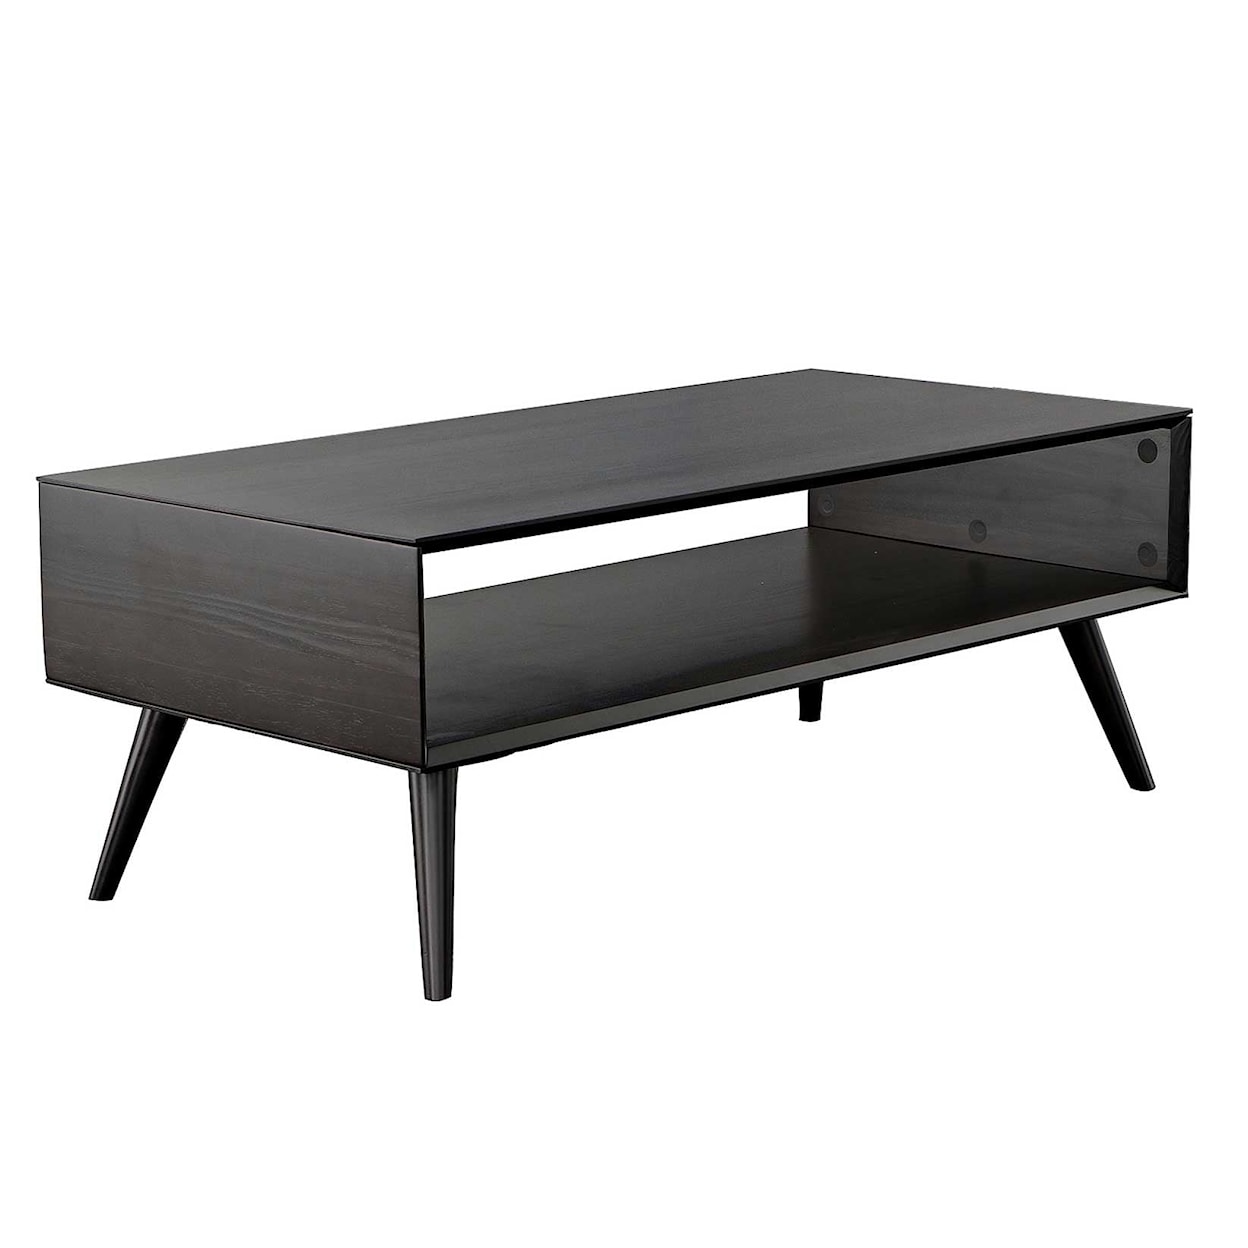 Steve Silver Elin Cocktail Table with Open Shelving